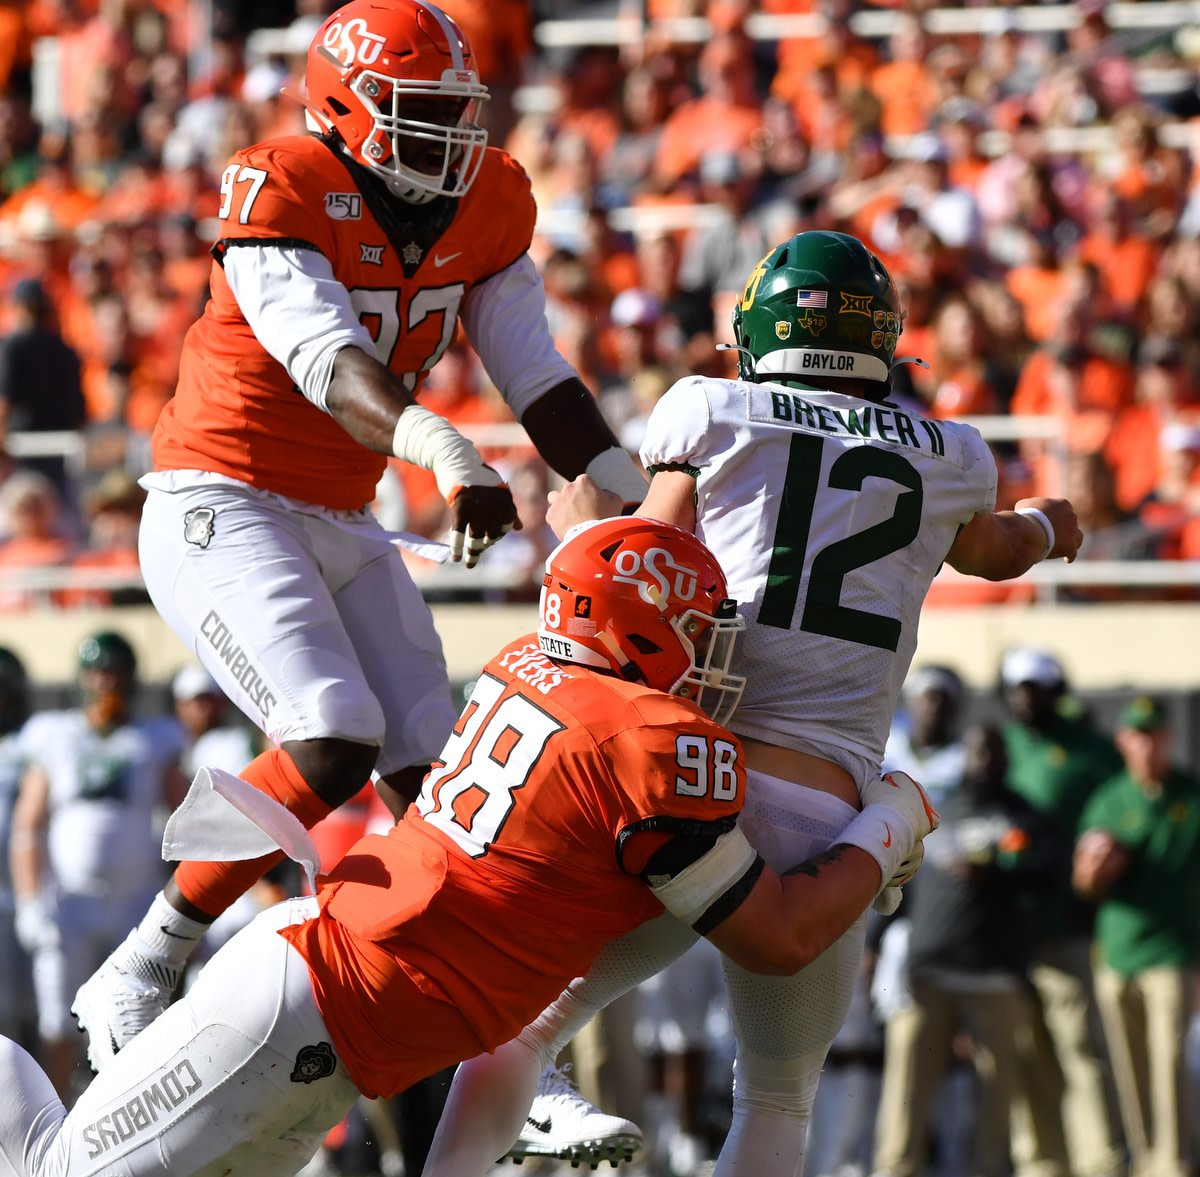 Oklahoma State spring football preview focuses on defensive tackles